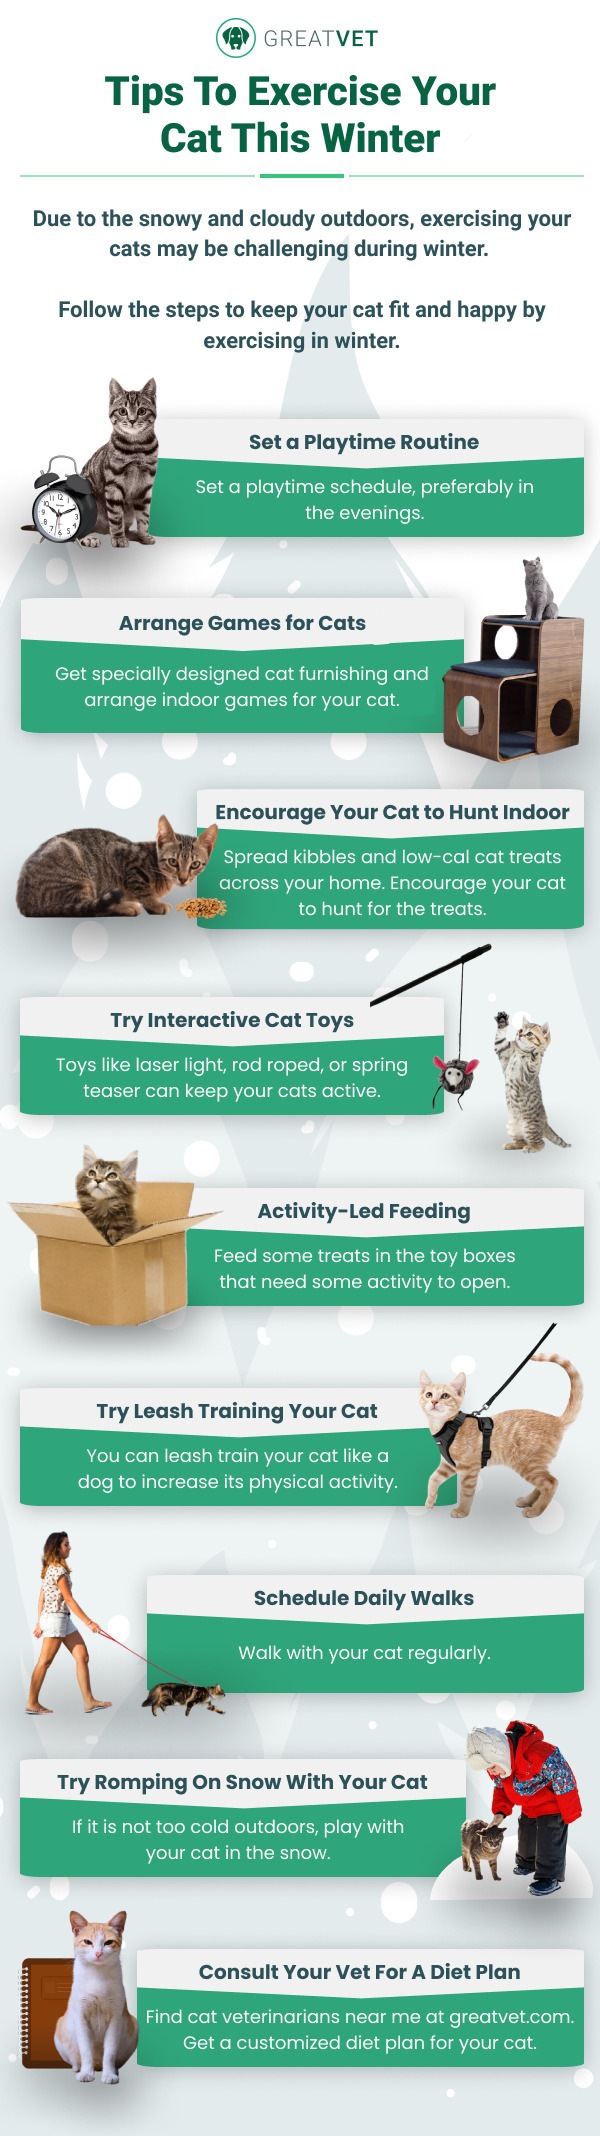 Winter tips for your cat exercise